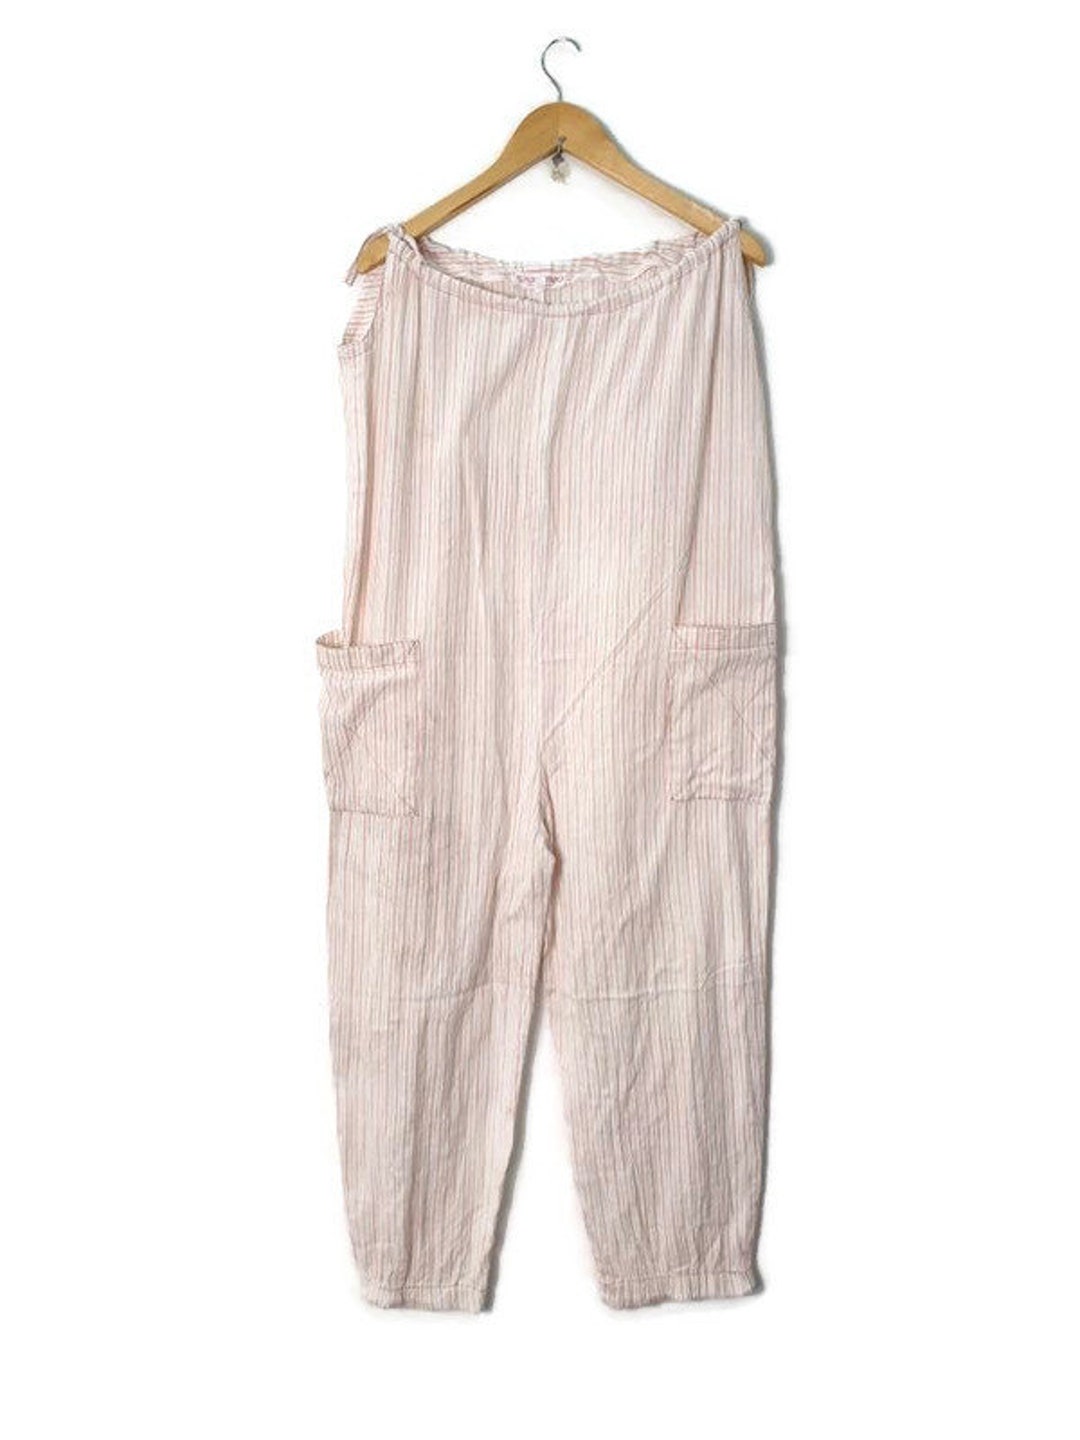 Japanese Brand Cantwo Harem Pants Baggy Pants Fu - Etsy